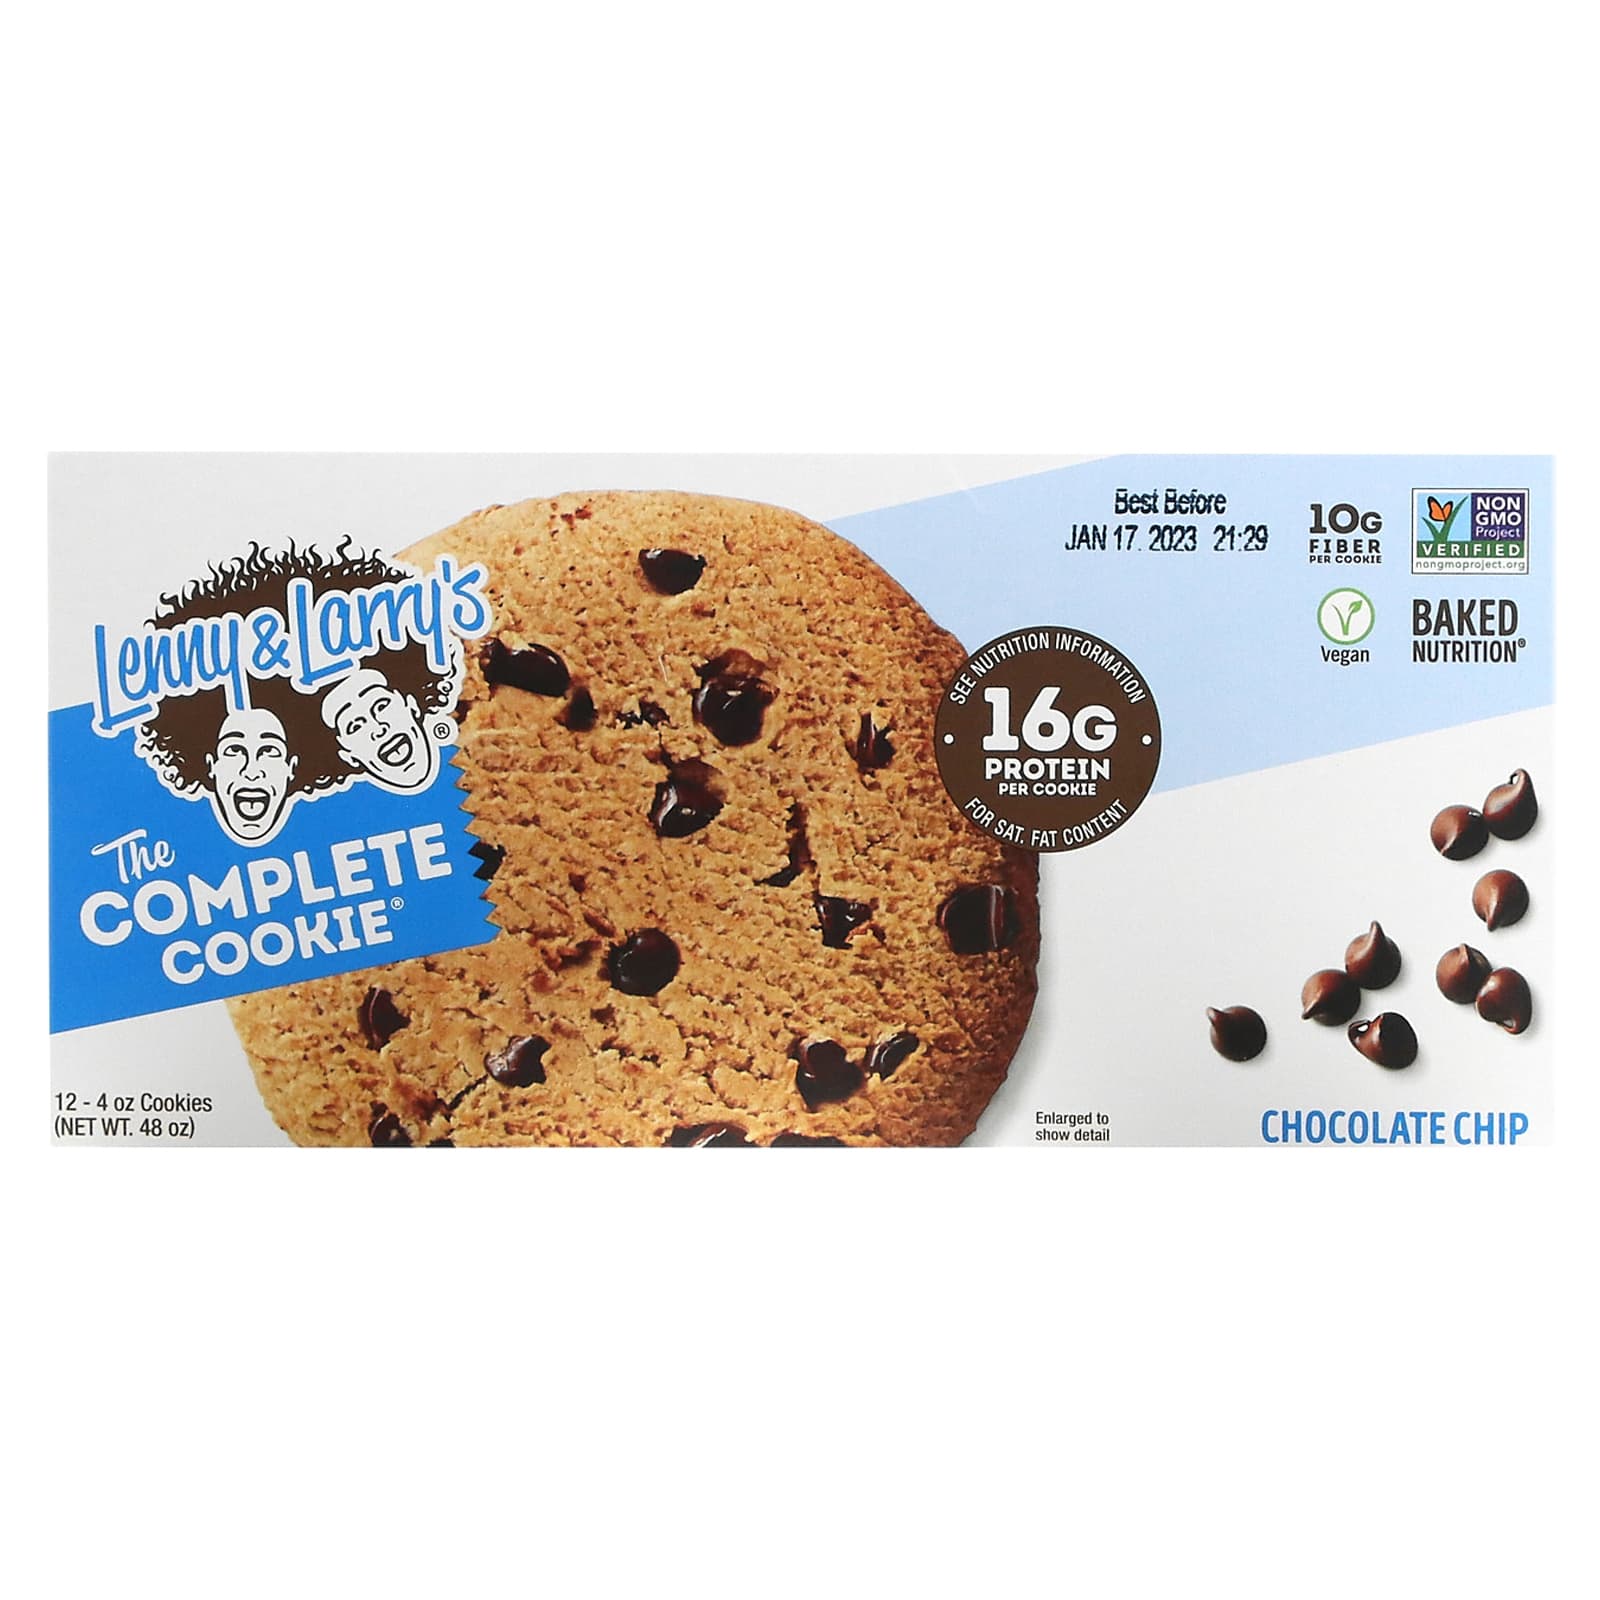 Lenny & Larry's, The COMPLETE Cookie, Chocolate Chip, 12 Cookies, 4 oz ...